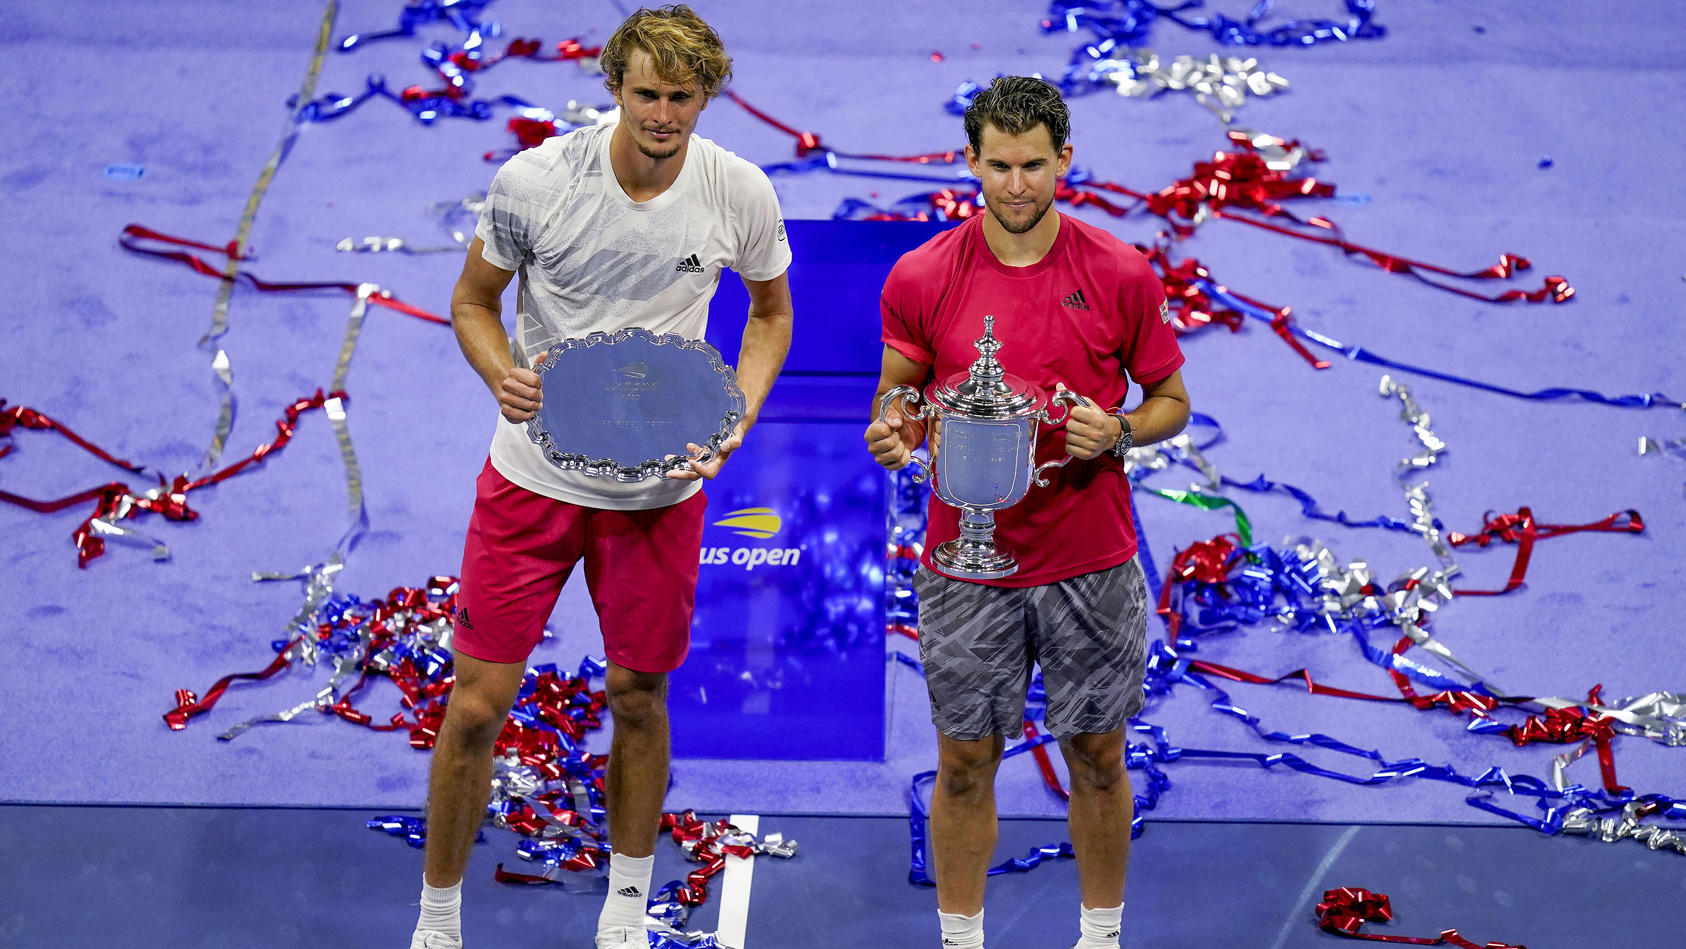 Dominic Thiem, of Austria, and Alexander Zverev, of Germany, pose for photos after the men's singles final of the US Open tennis championships, Sunday, Sept. 13, 2020, in New York. Thiem defeated Zverev in a tiebreaker. (AP Photo/Seth Wenig)